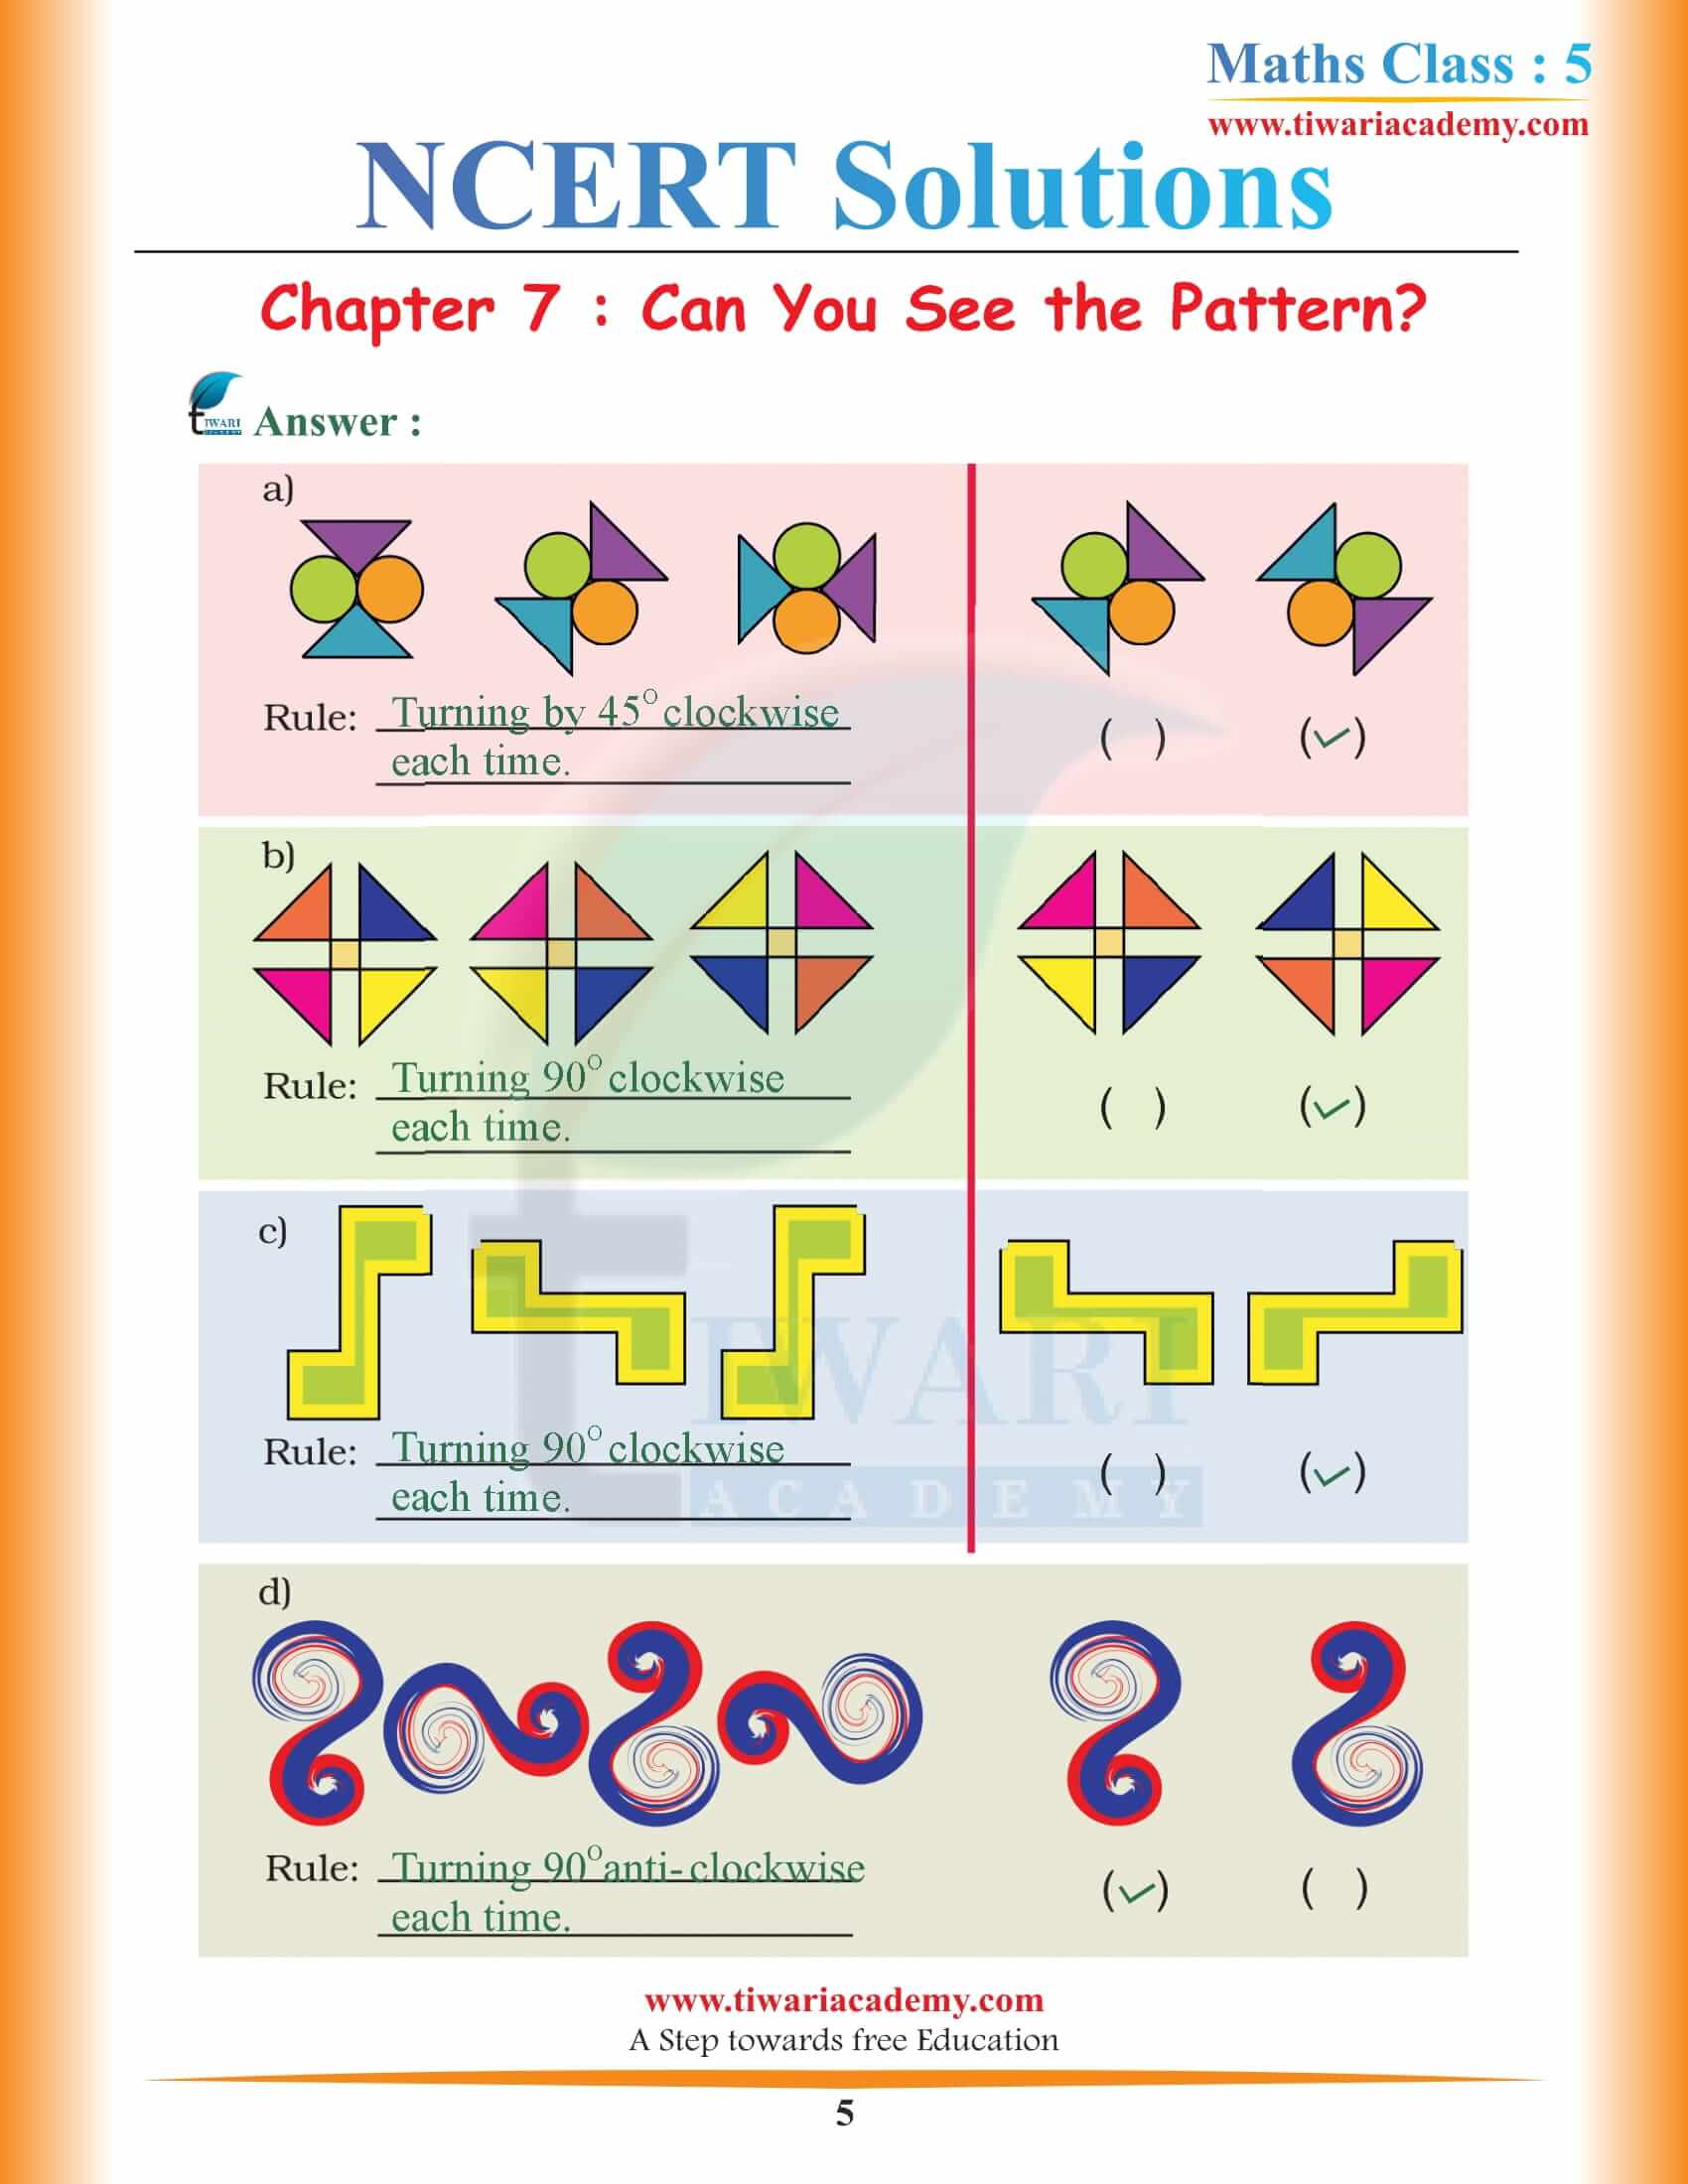 NCERT Solutions for Class 5 Maths Chapter 7 free